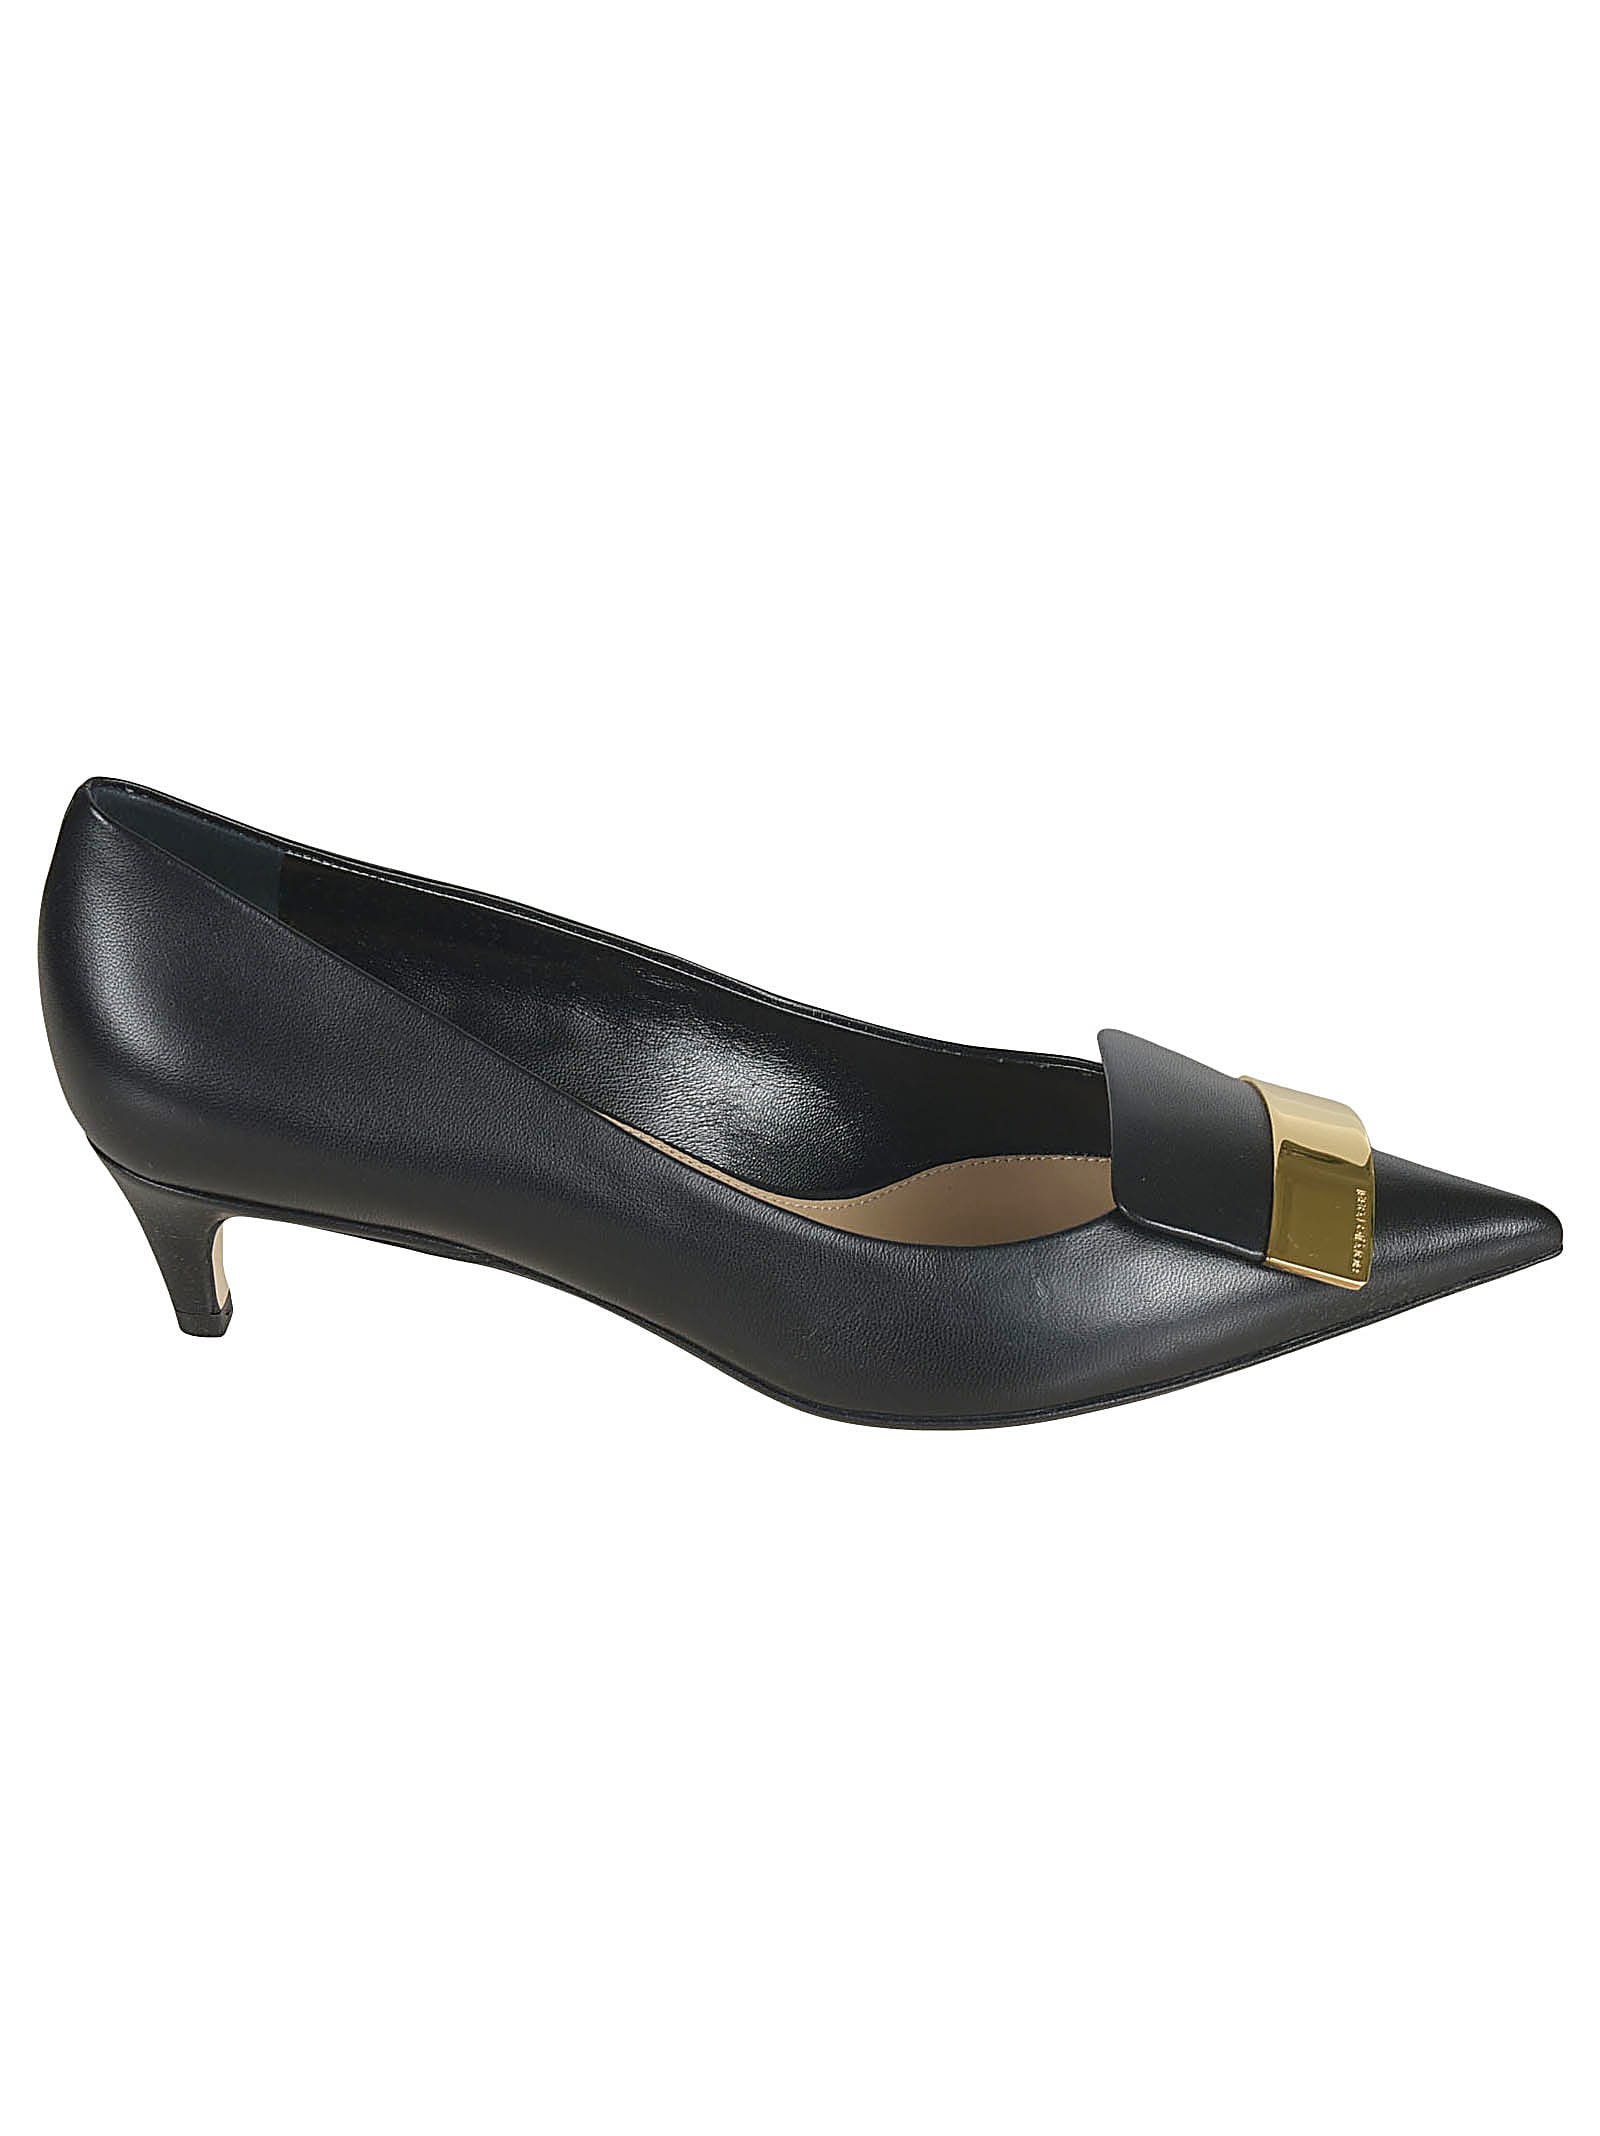 Buy Sergio Rossi Logo Plaque Pumps online, shop Sergio Rossi shoes with free shipping